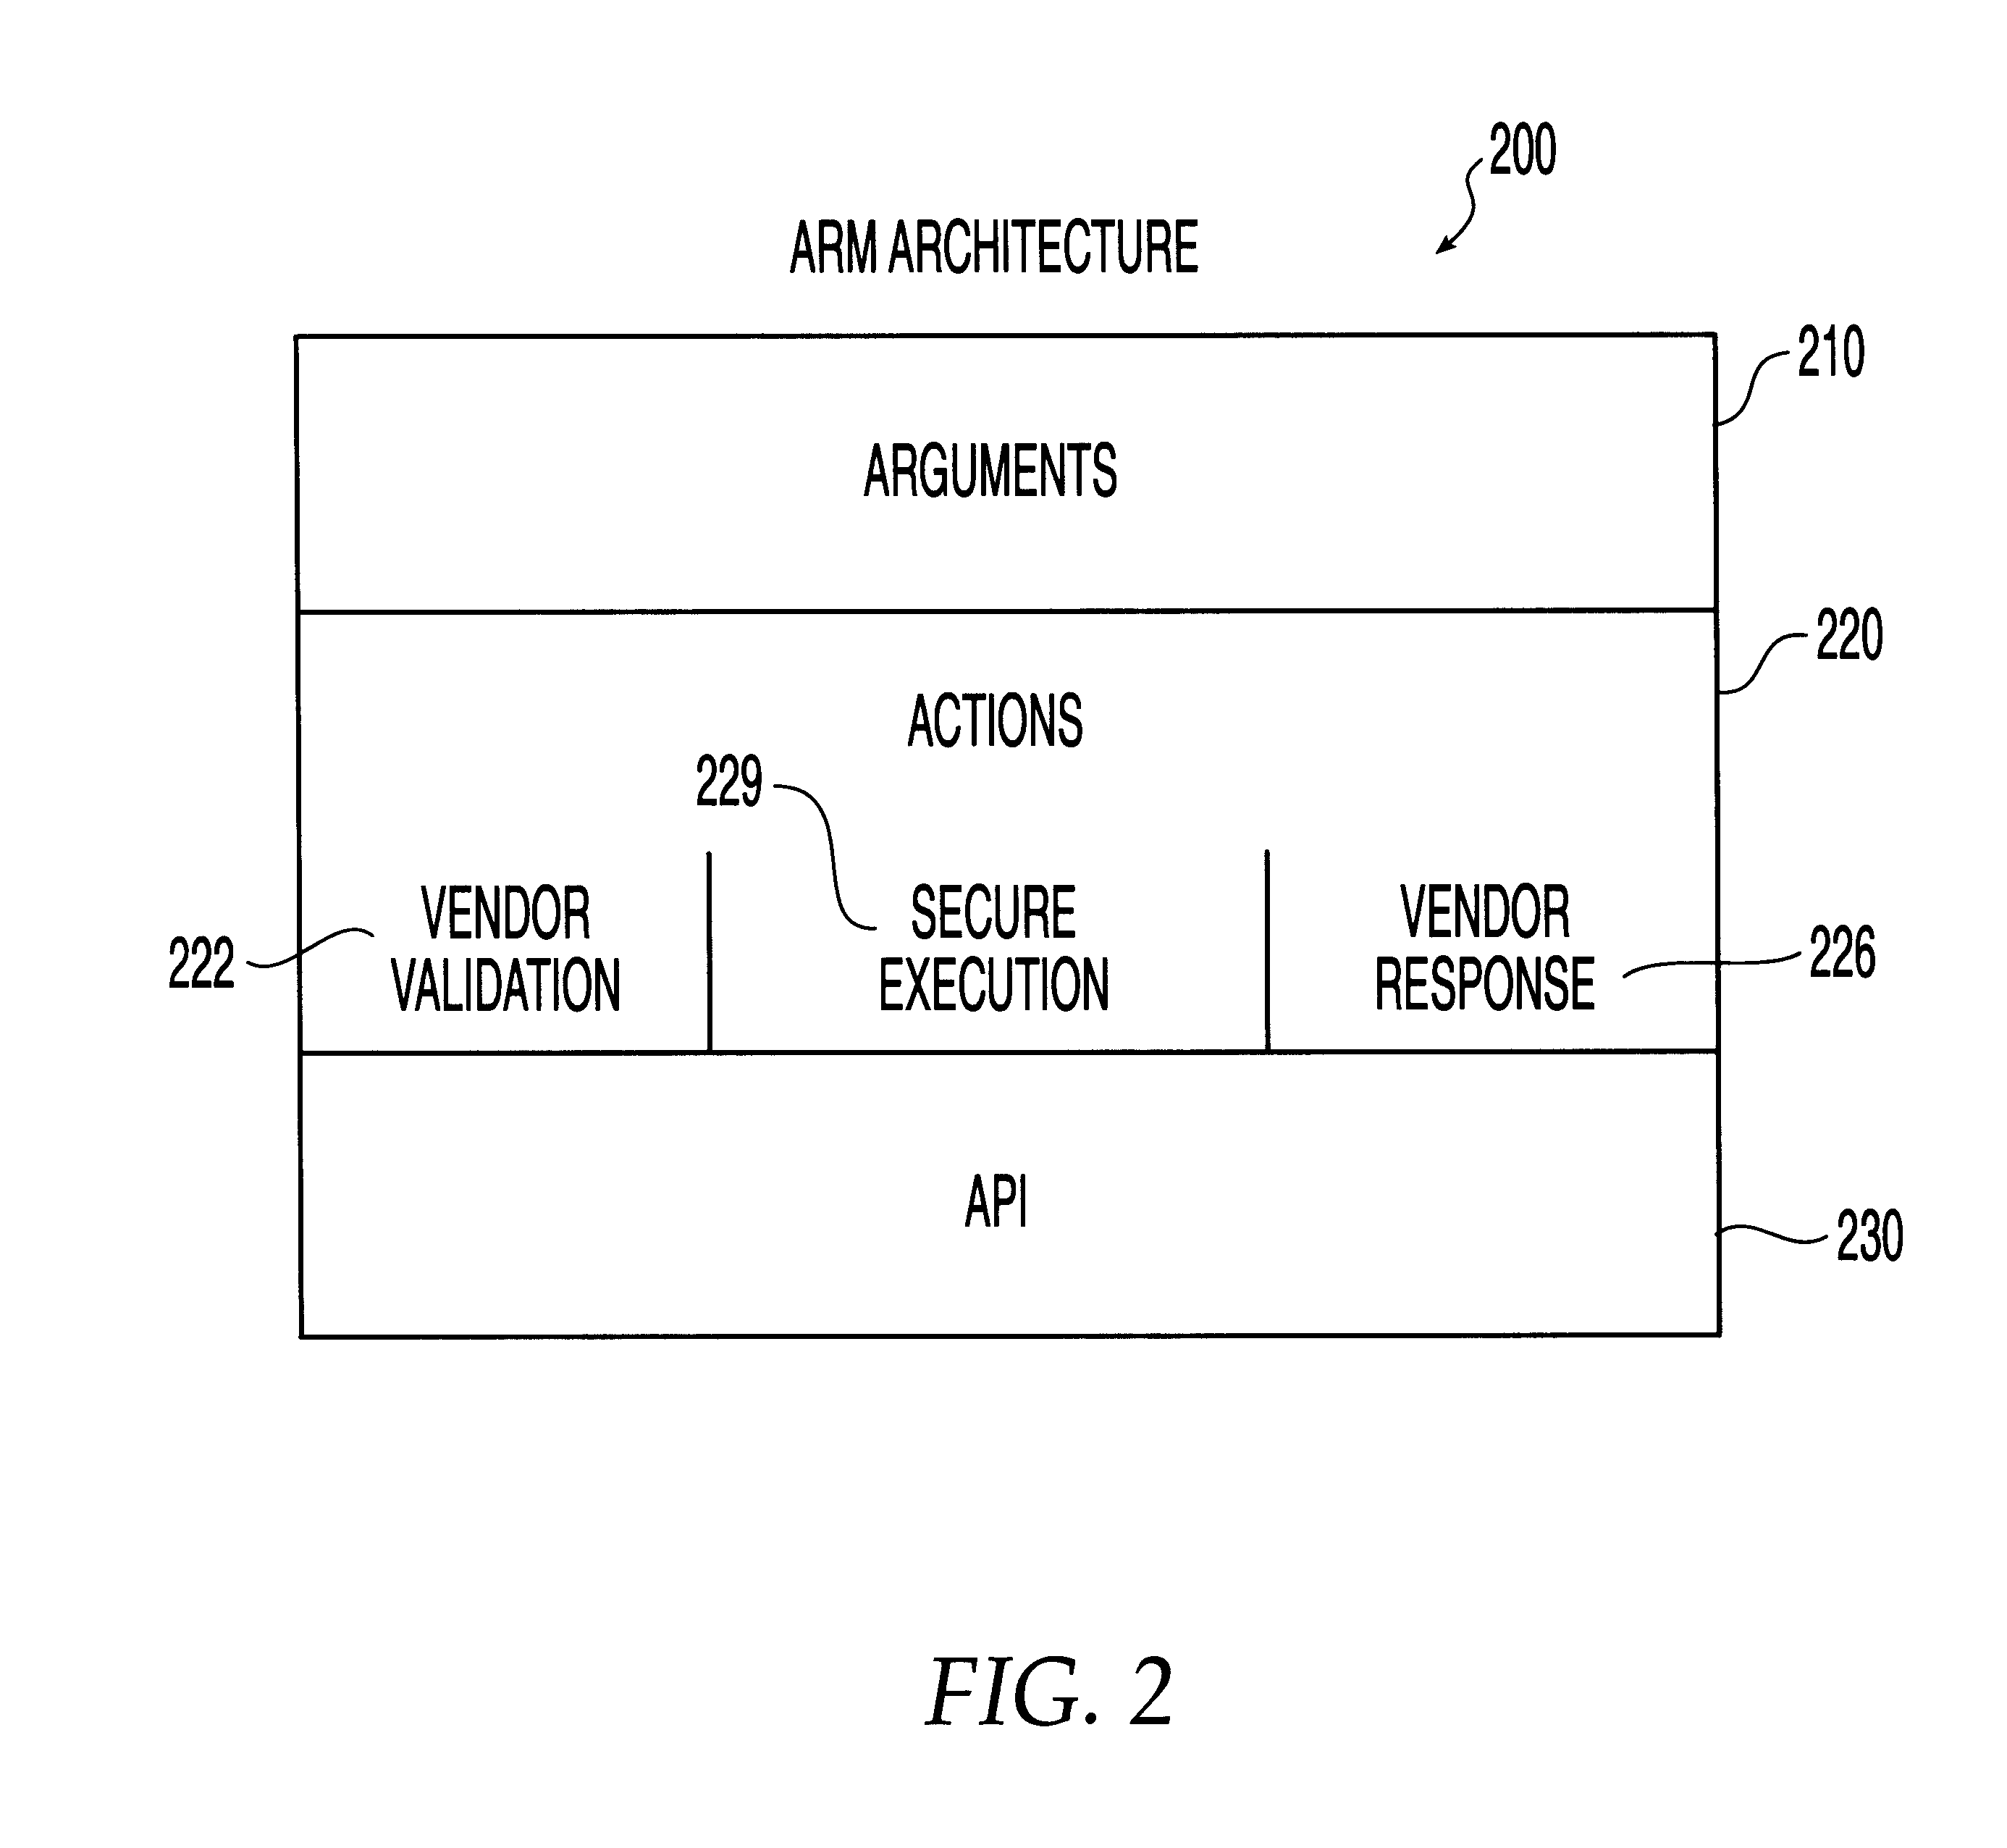 System, method and computer program product for automatic response to computer system misuse using active response modules